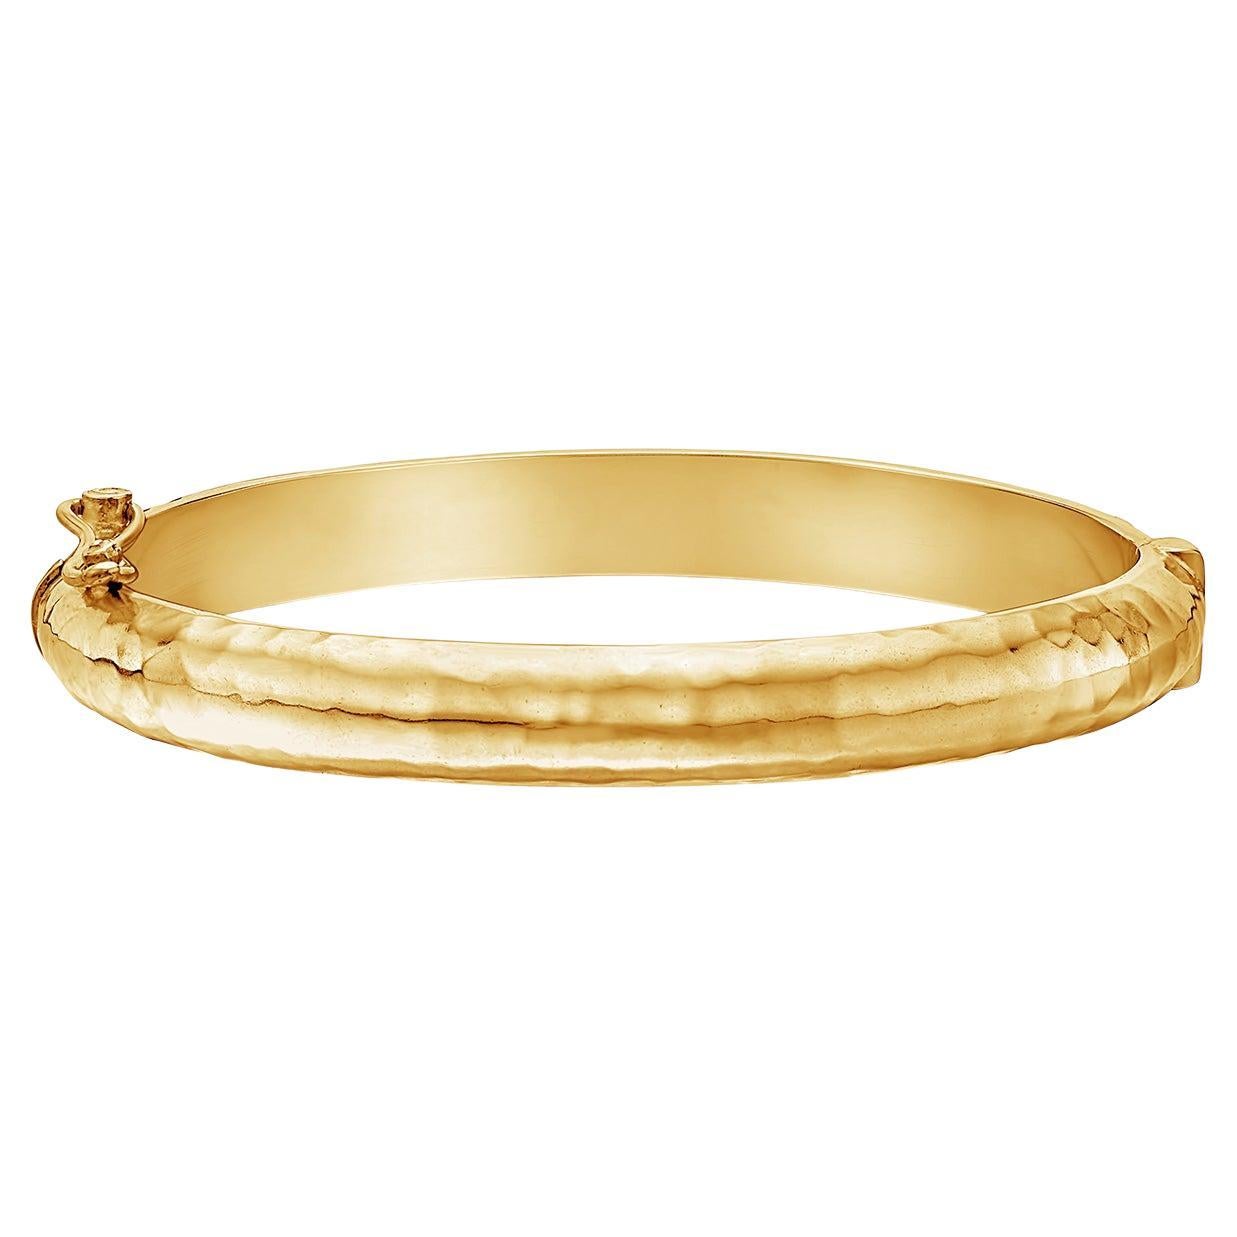 6mm Hinged Hammered Nomad Bangle In 18ct Gold Vermeil For Sale